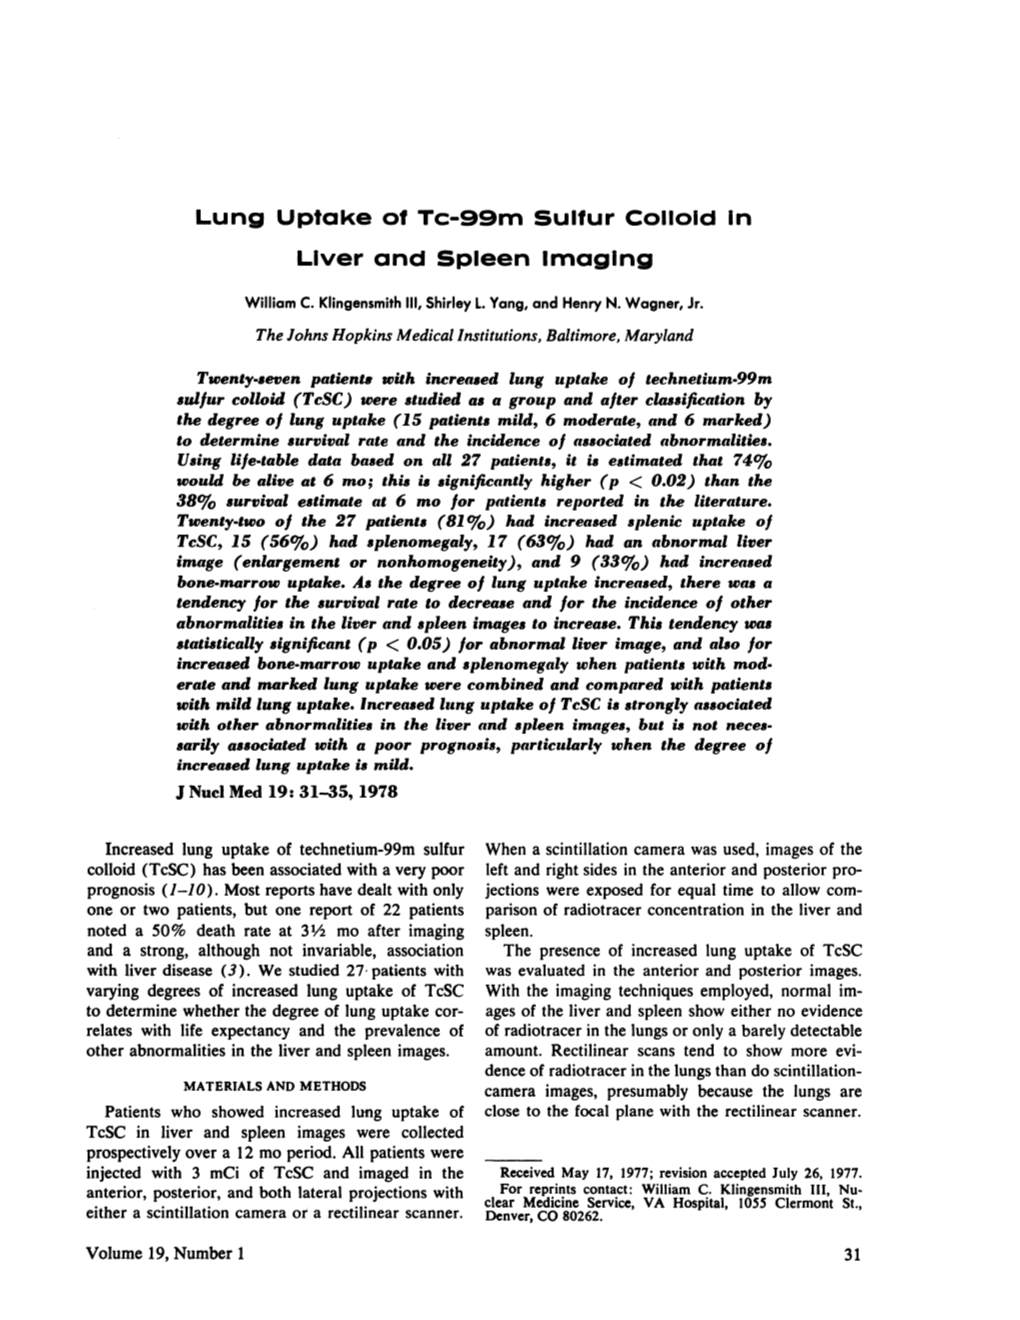 Lung Uptake of Tcâ€”99M Sulfur Colloid in Liver and Spleen Imaging